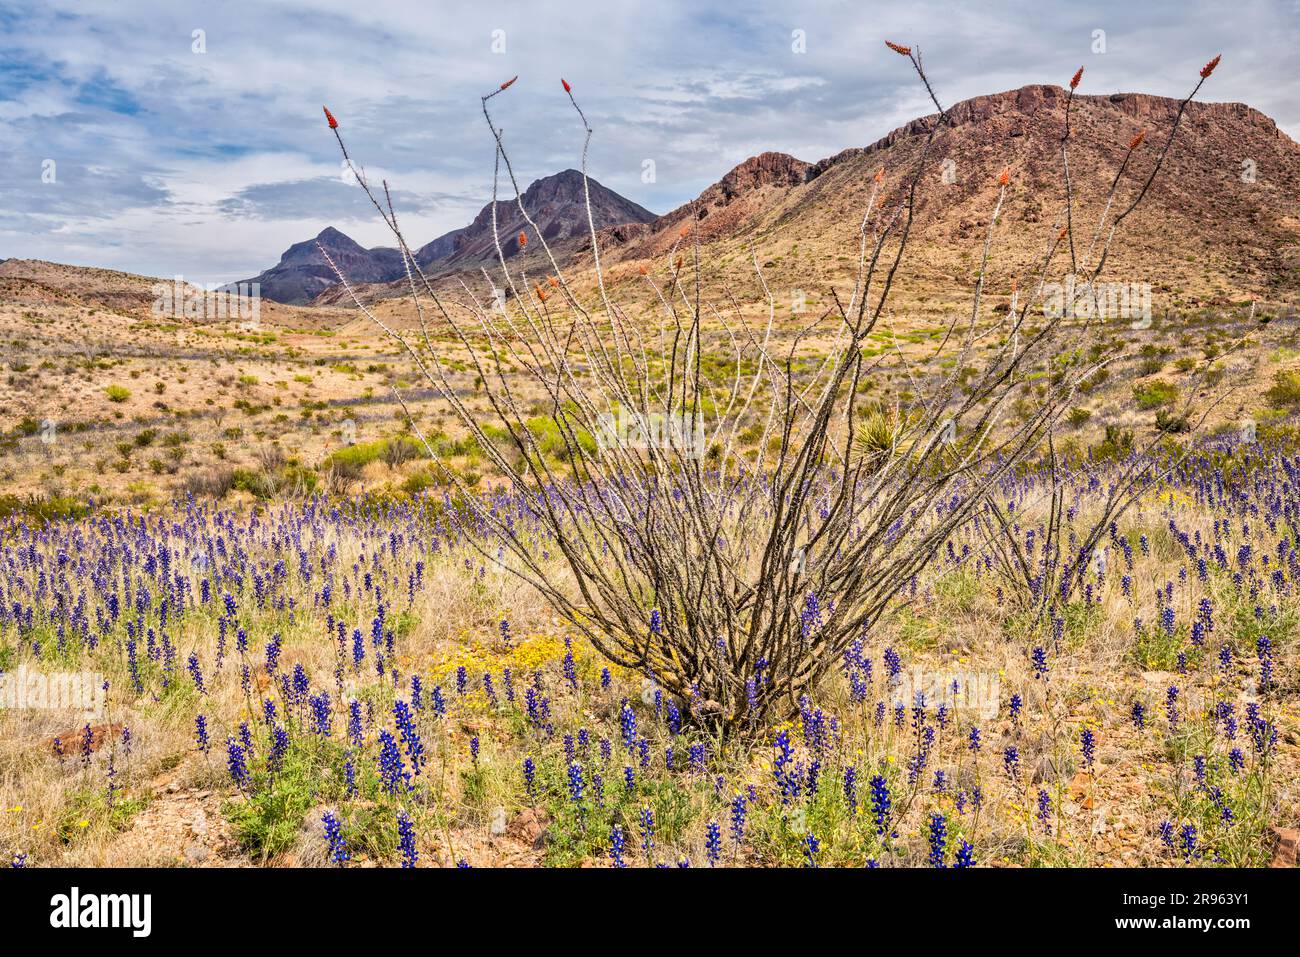 Ocotillo, bluebonnet in fiore a marzo, Ross Maxwell Scenic Drive, Chihuahuan Desert, Big Bend National Park, Texas, USA Foto Stock